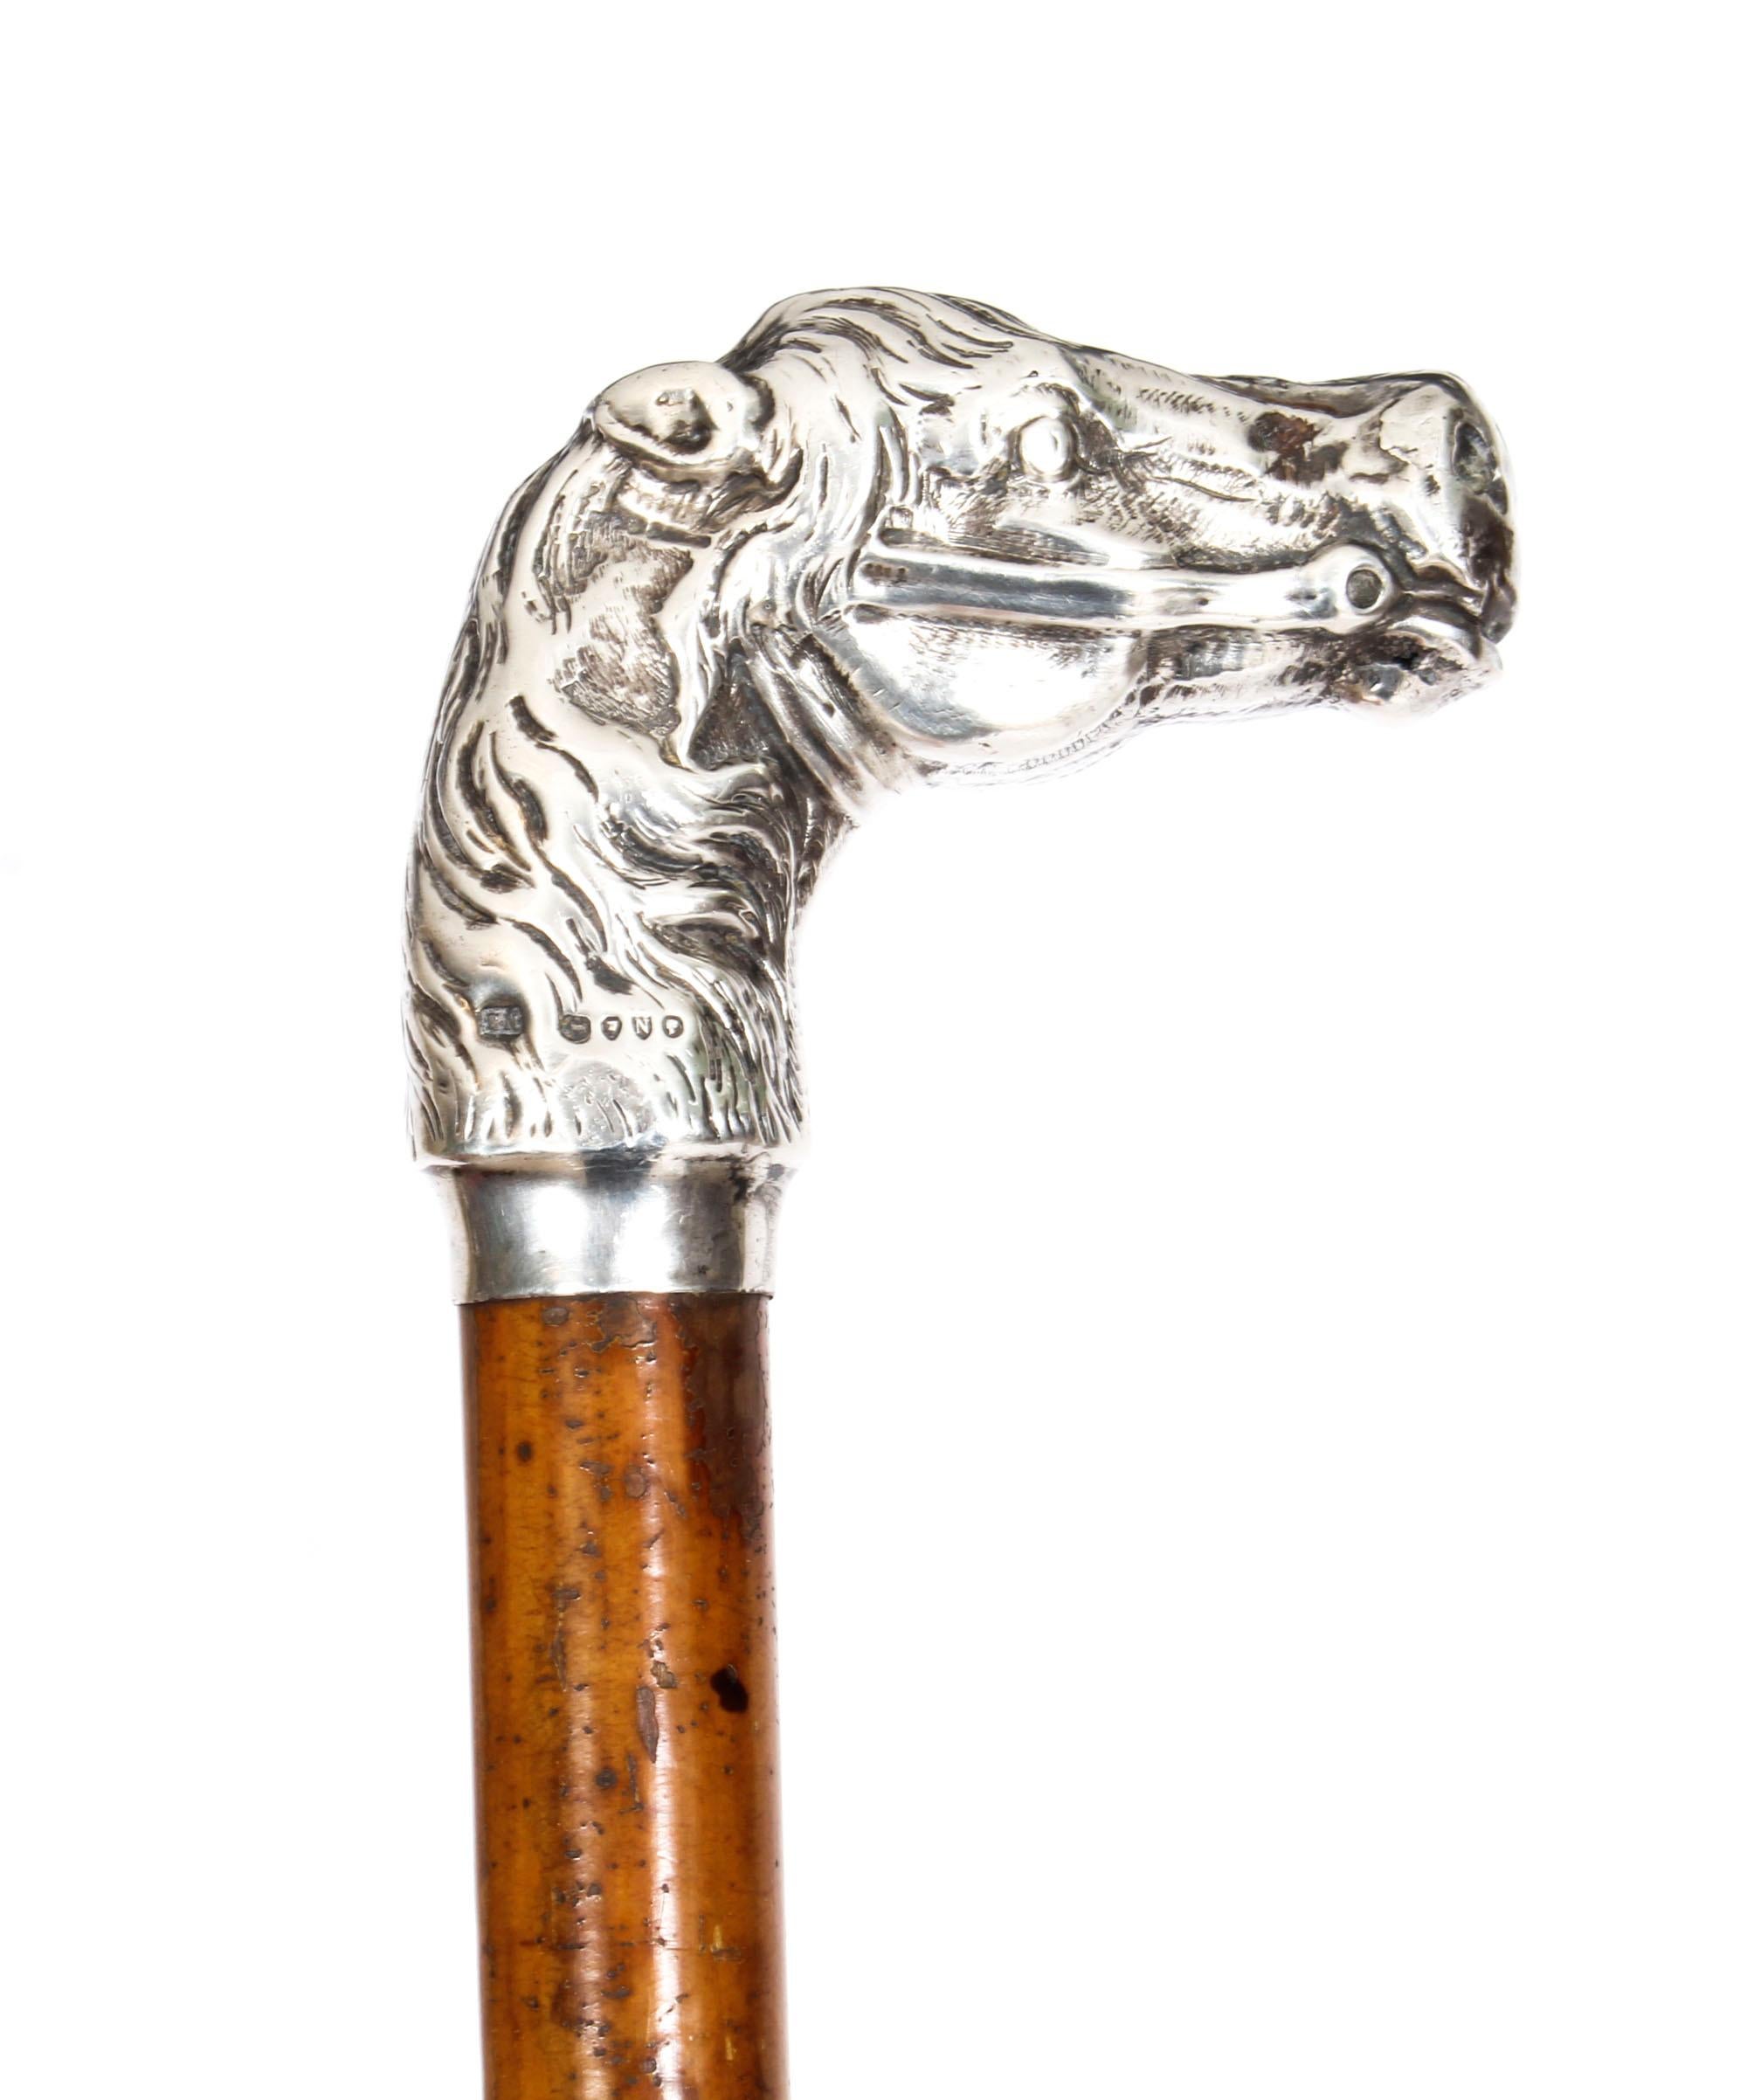 This is a truly magnificent and rare antique Victorian sterling silver mounted walking cane, 1888 in date.
 
This superb decorative walking cane has a splendid chased sterling silver handle in the form of a horse's head by the renowned